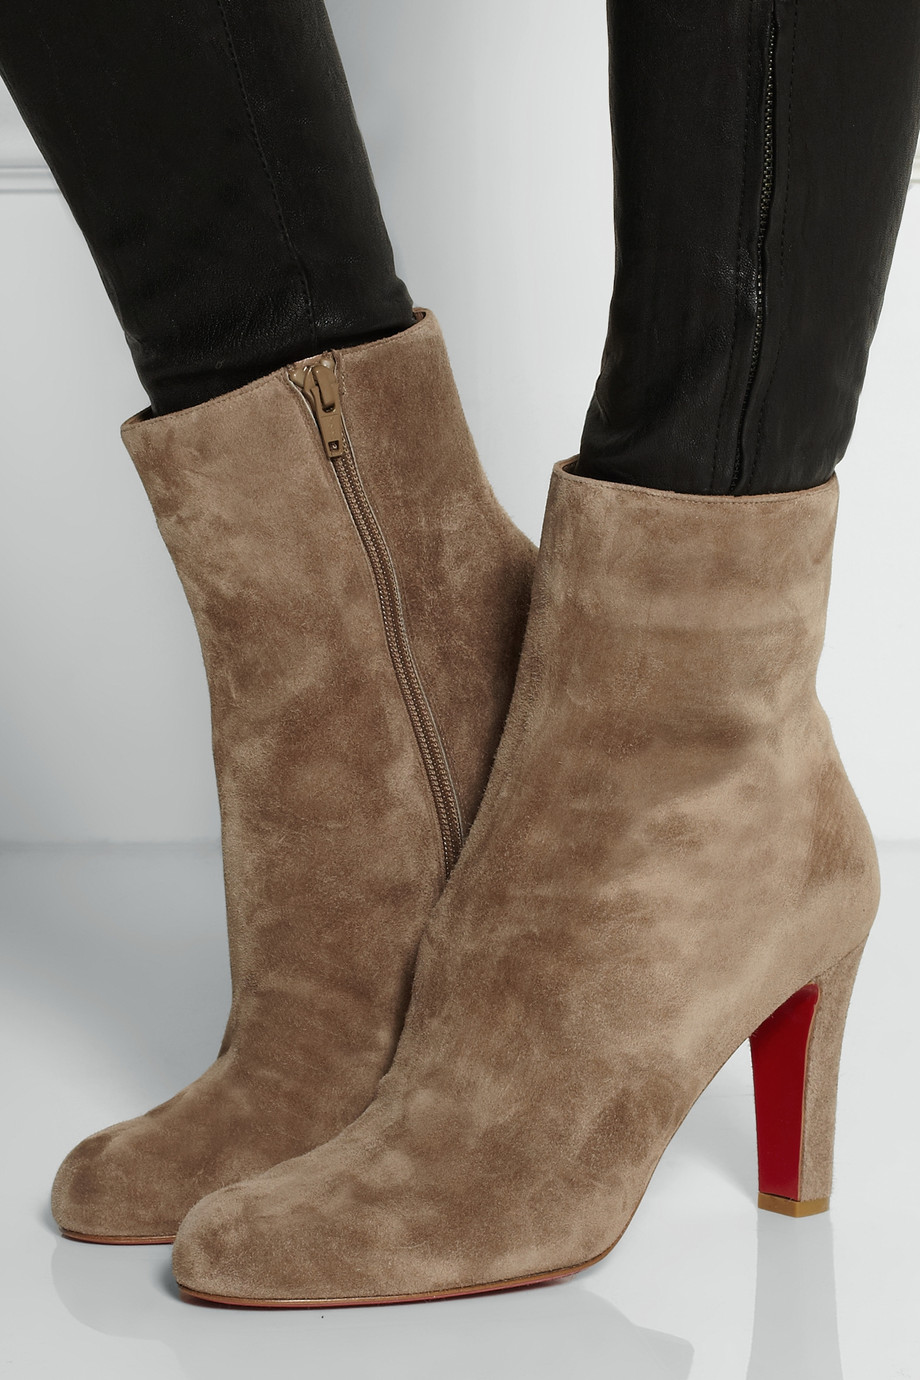 Peony Design ? christian louboutin miss tack suede ankle boots  